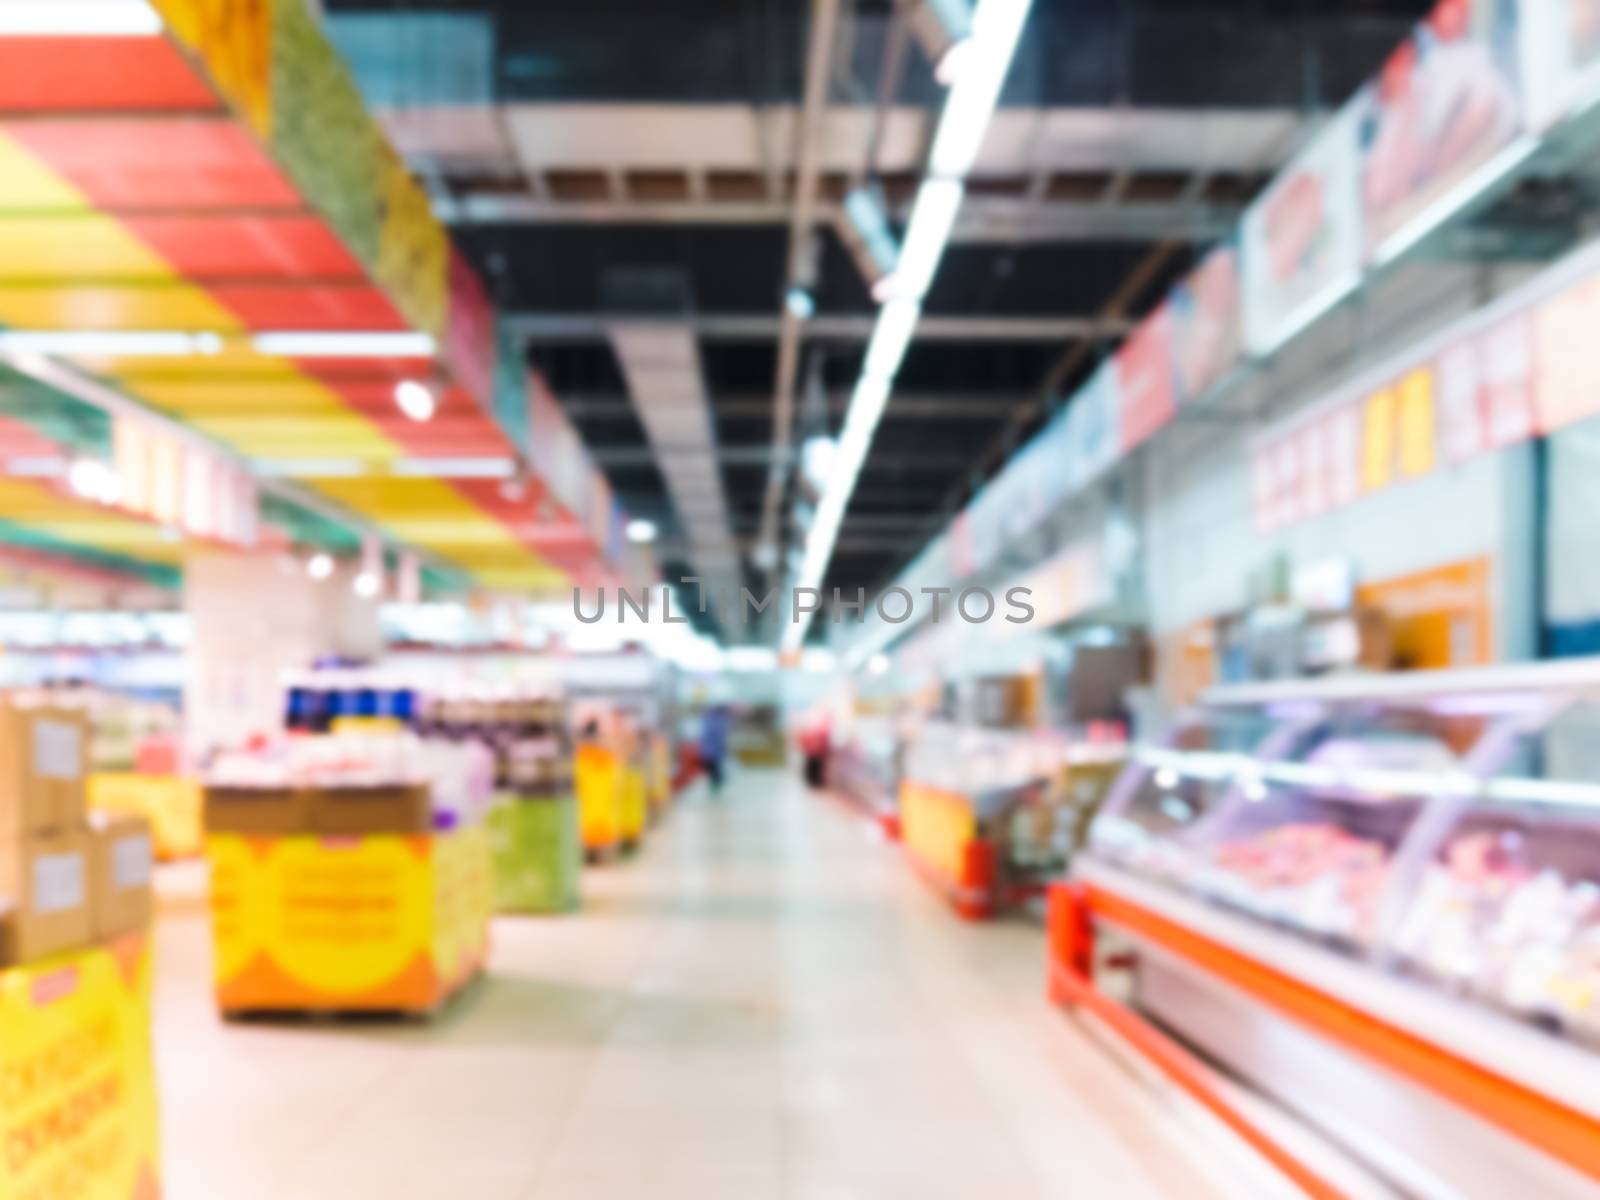 Abstract blurred supermarket aisle with colorful shelves with refrigerator as background